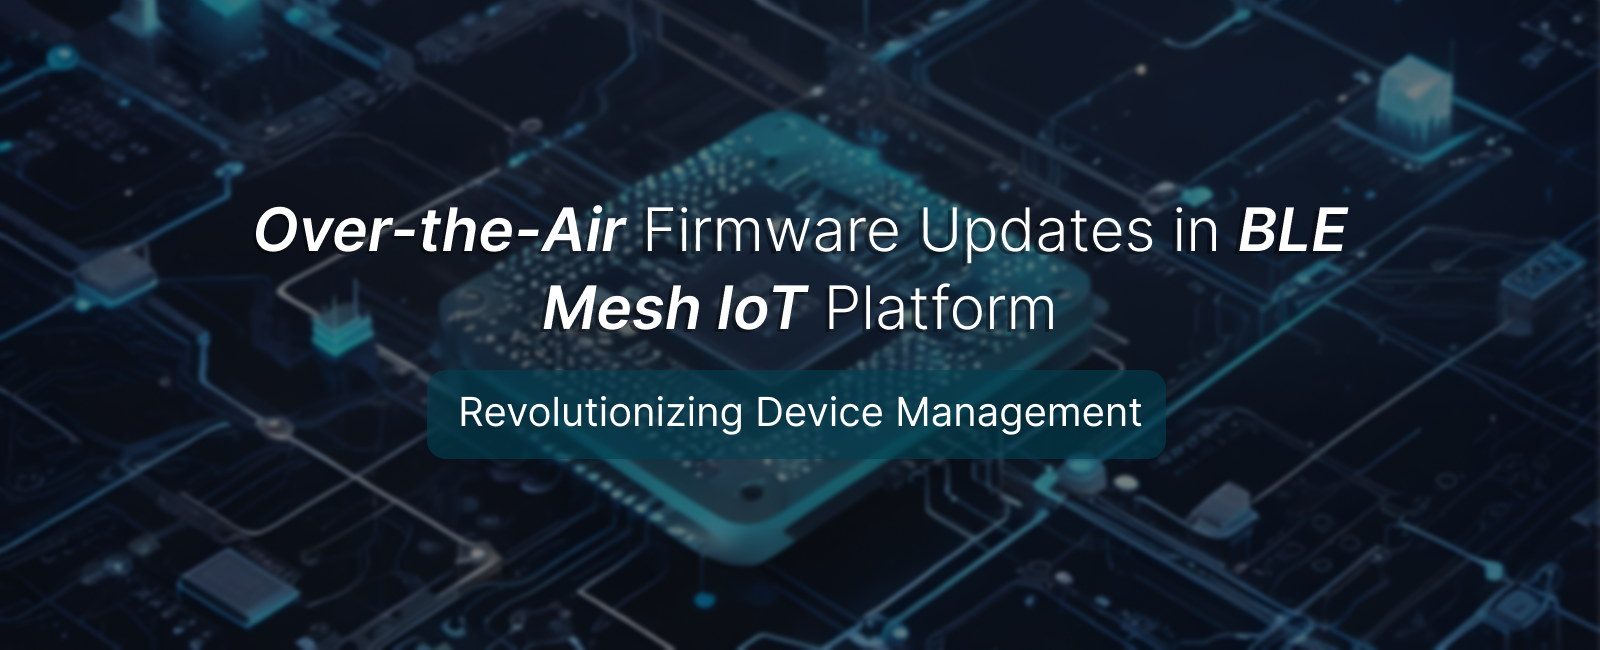 Over-the-Air Firmware Updates in BLE Mesh IoT Platform: Revolutionizing Device Management